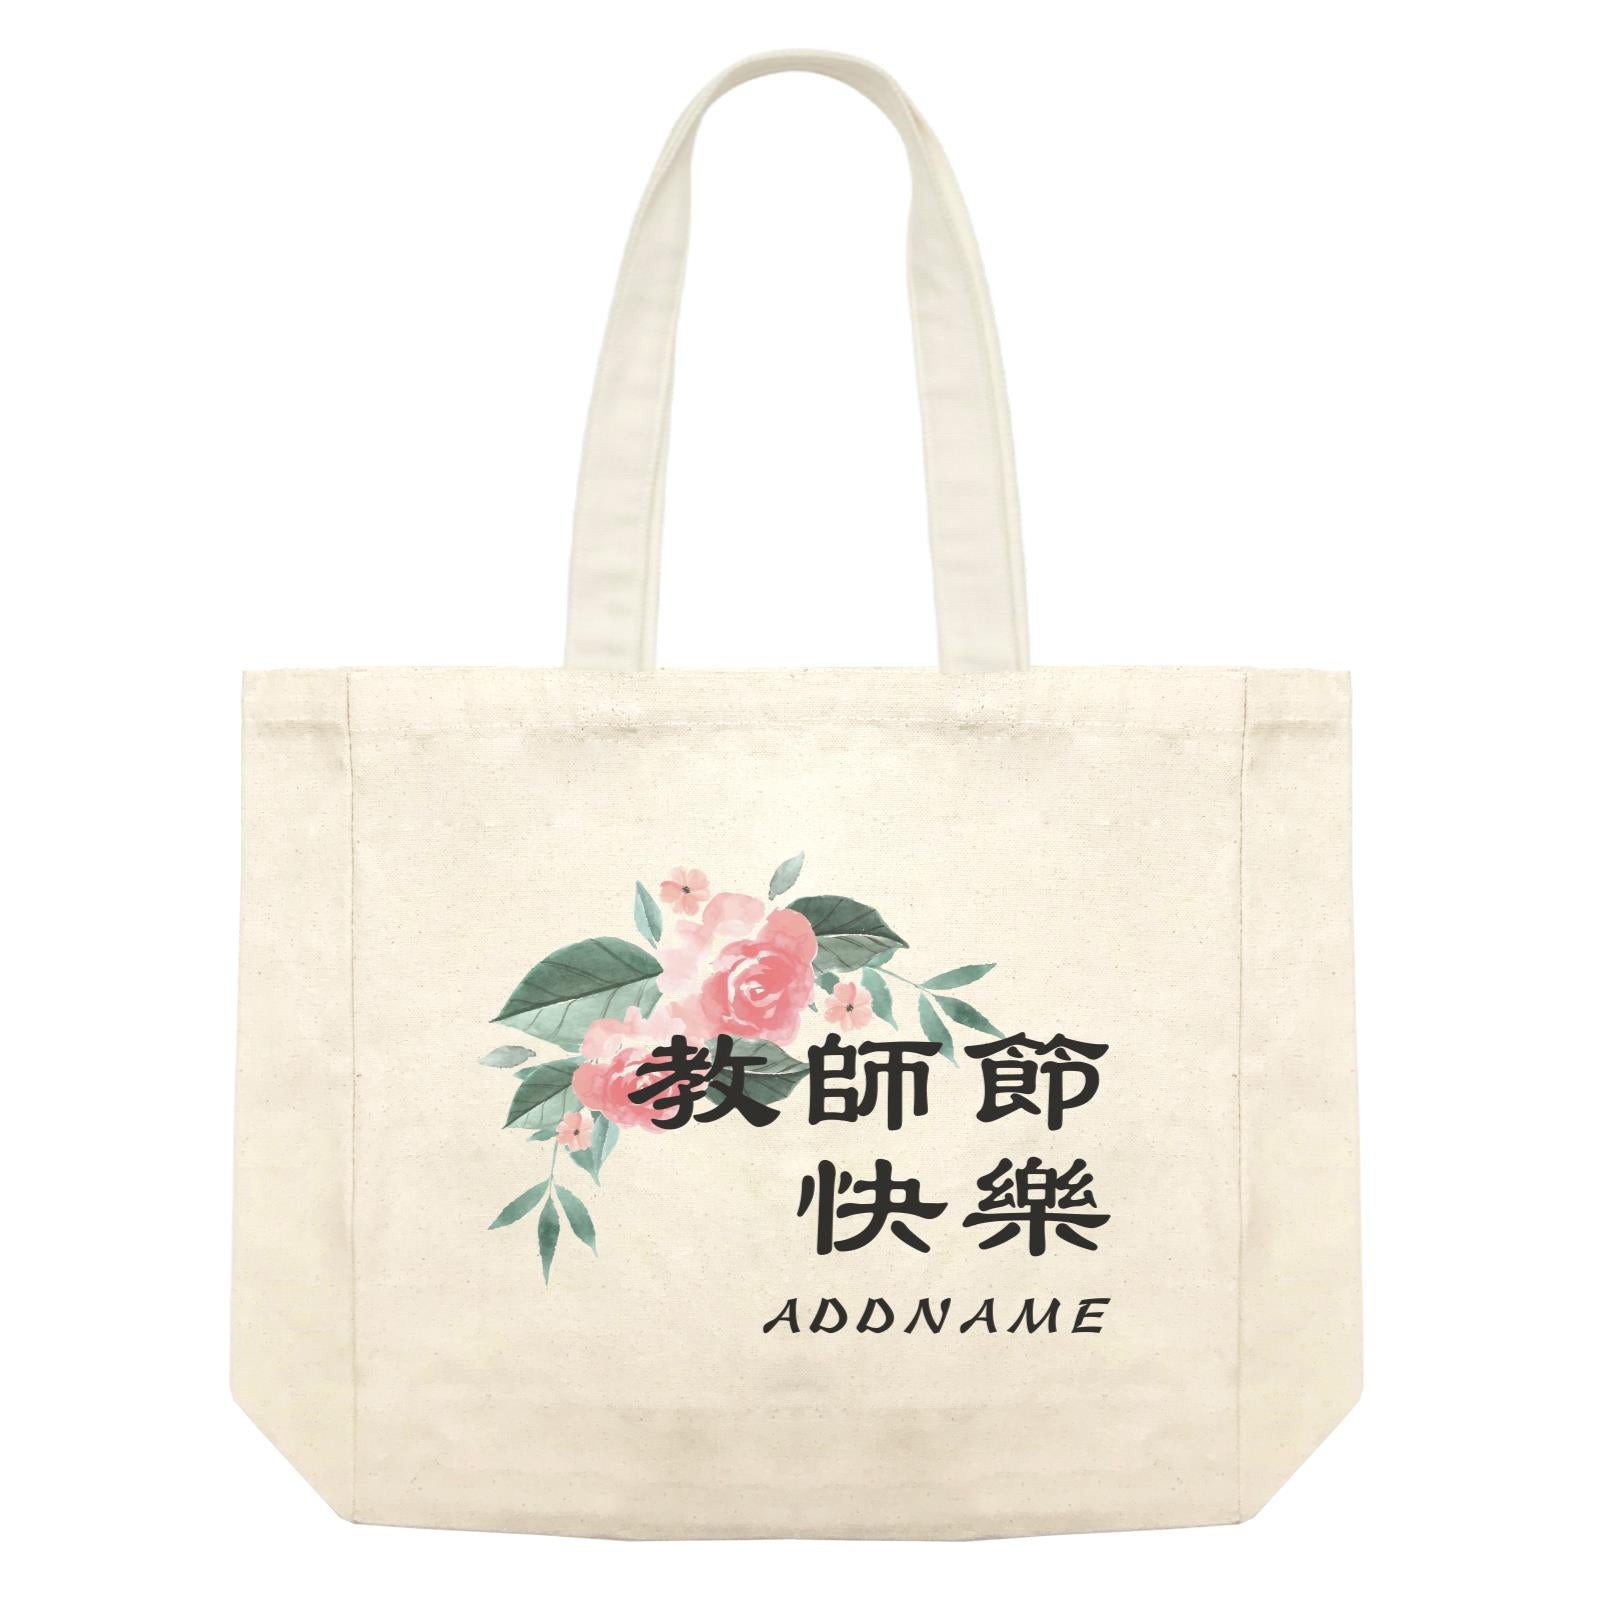 Watercolour Happy Teachers Day Chinese Addname Shopping Bag